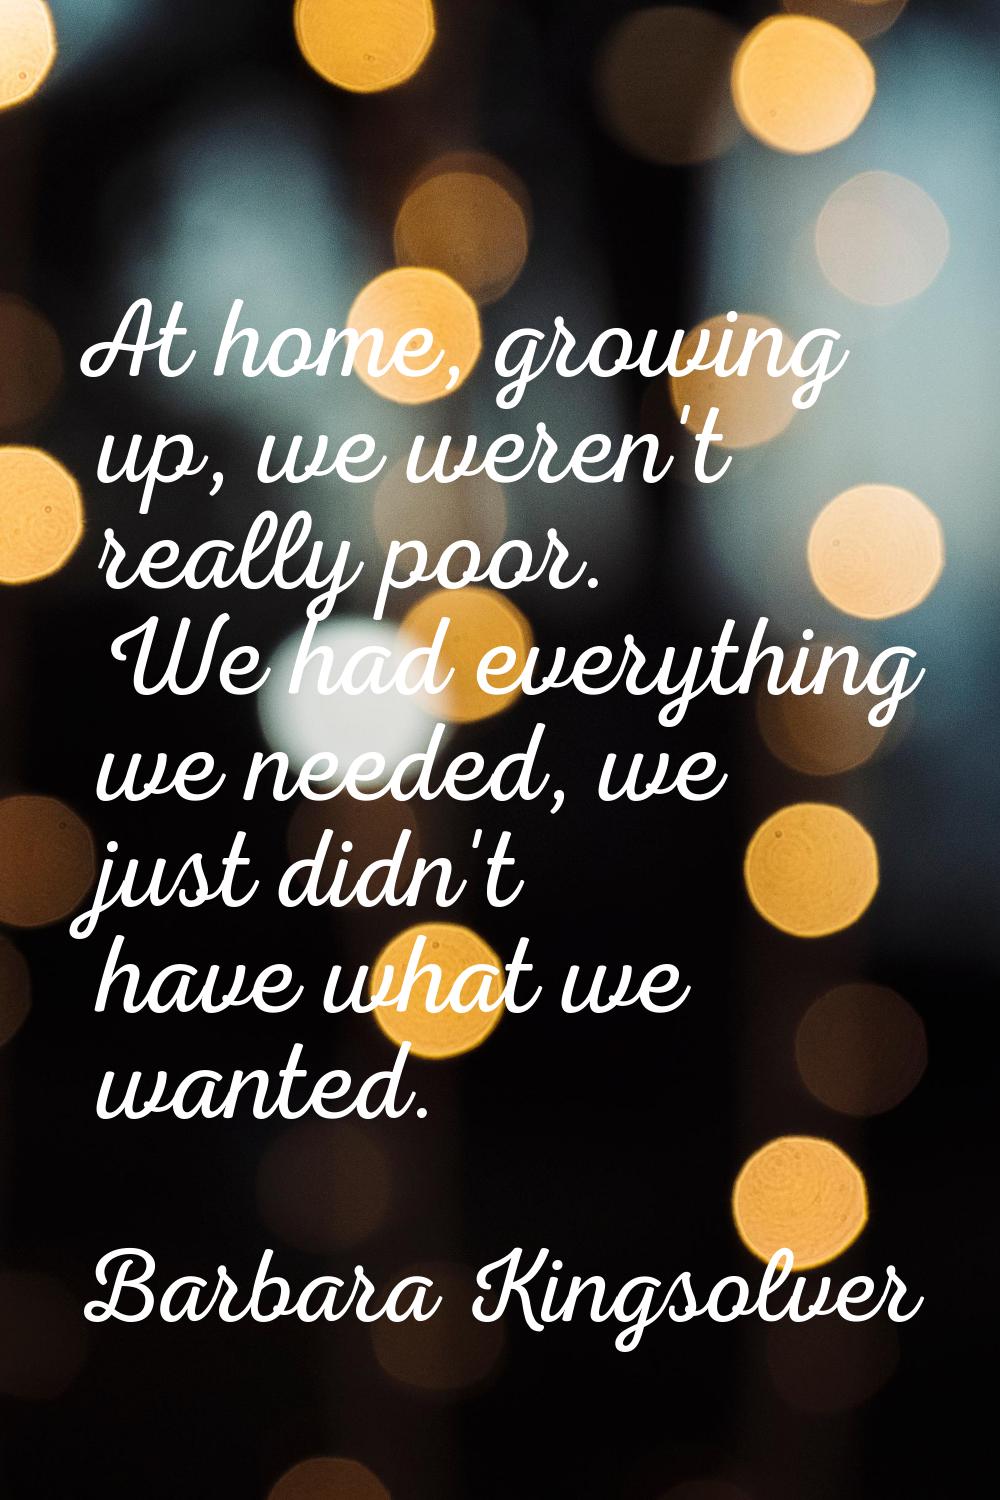 At home, growing up, we weren't really poor. We had everything we needed, we just didn't have what 